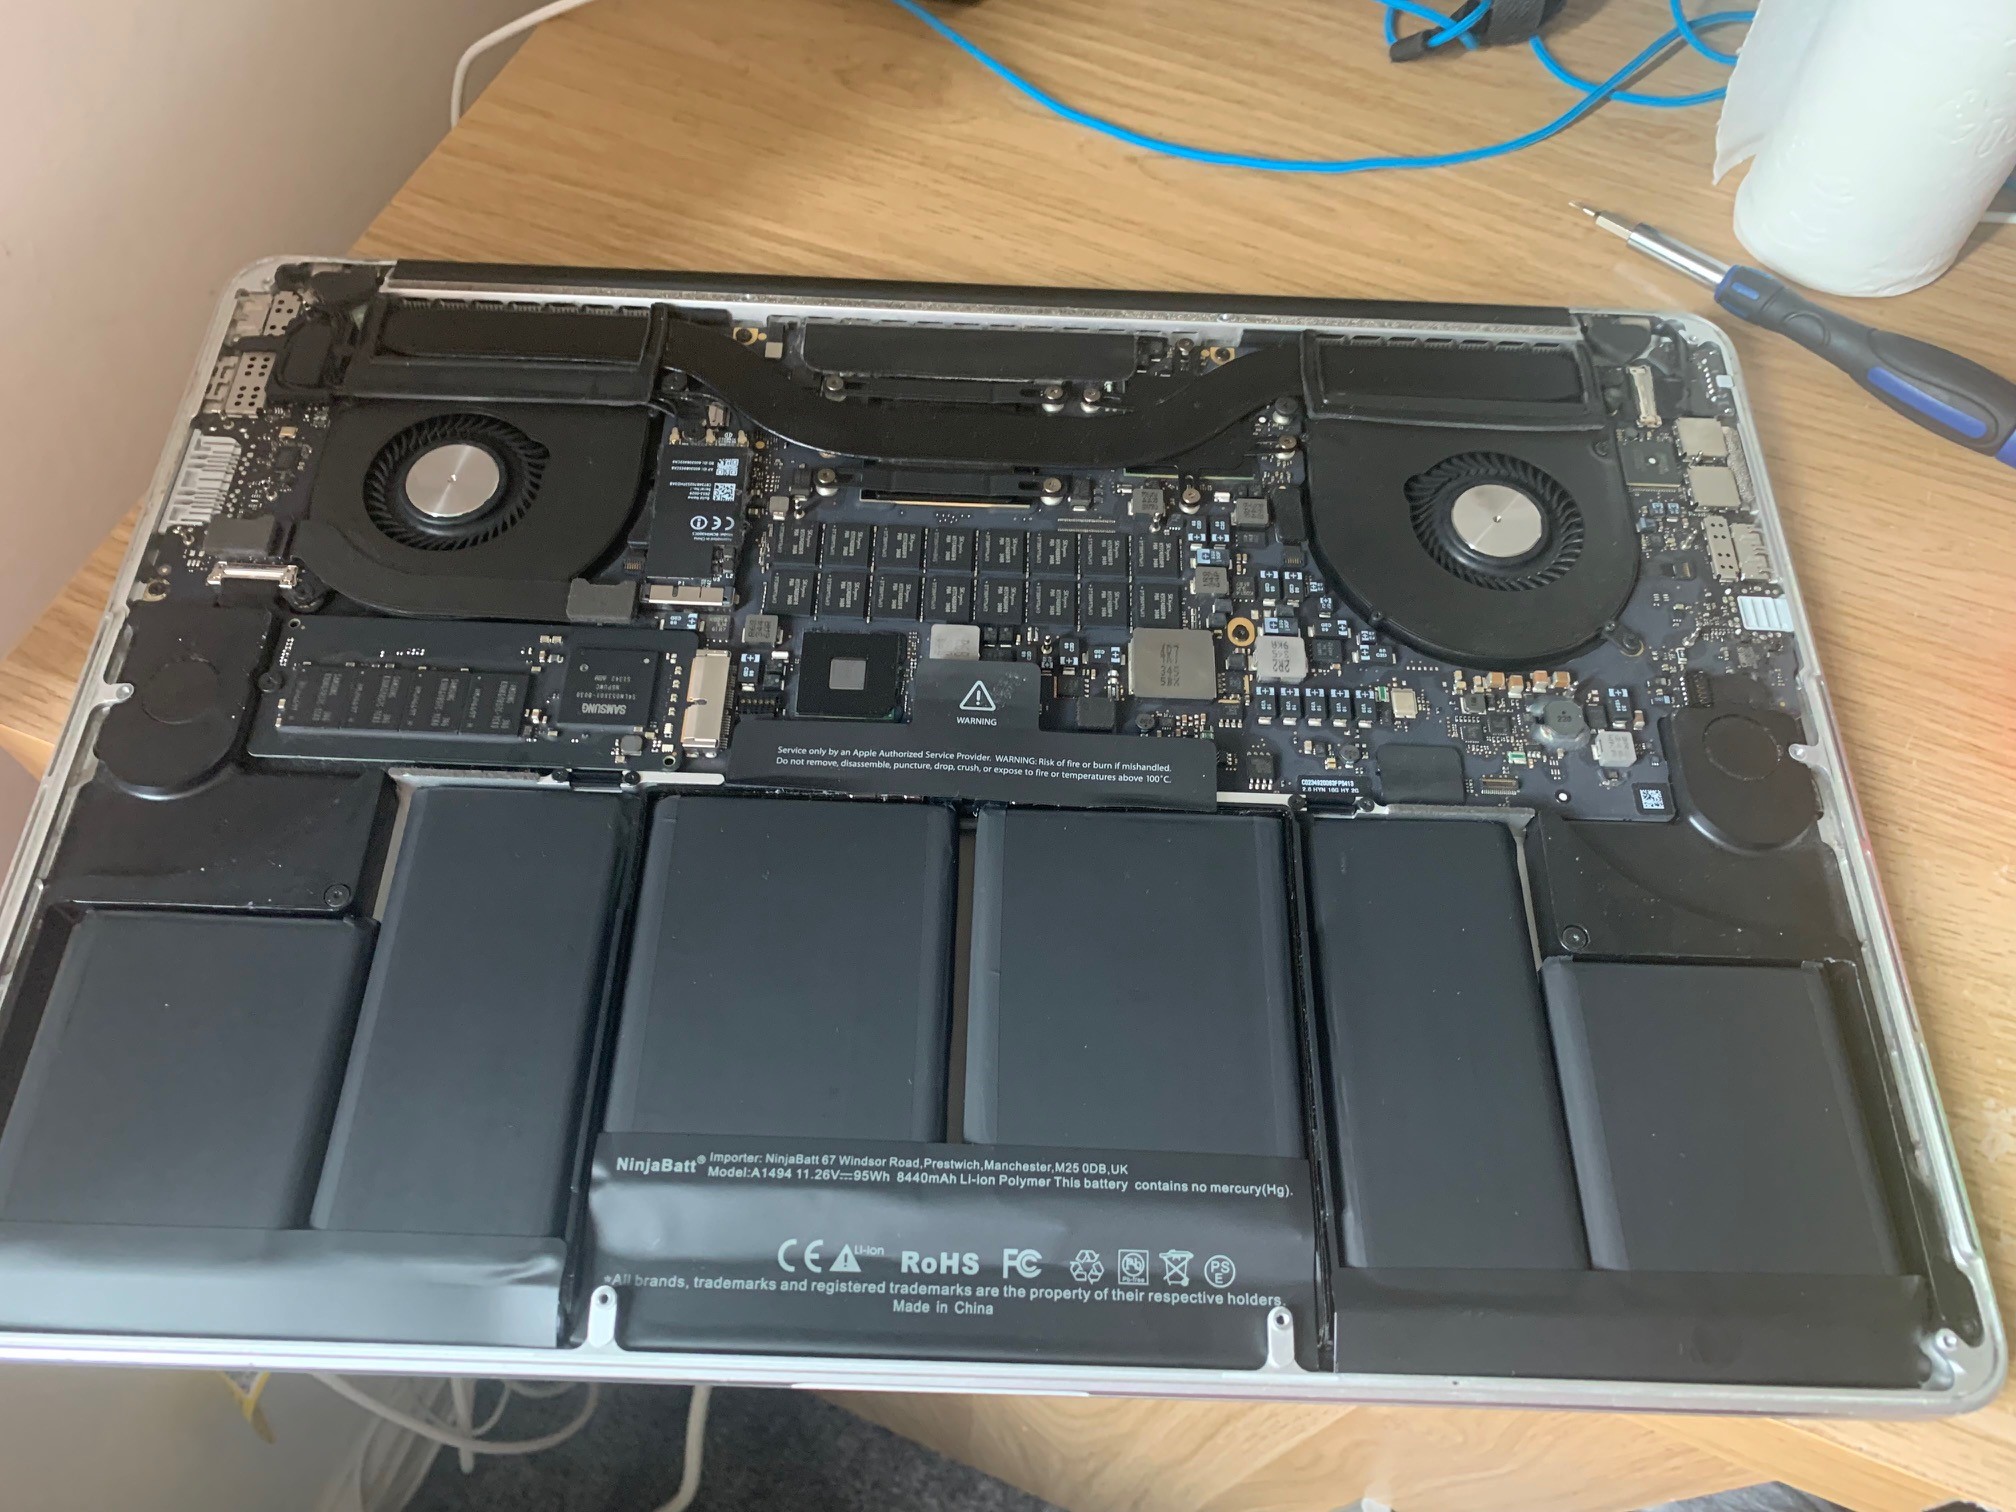 A dusty 8 year old Macbook Pro